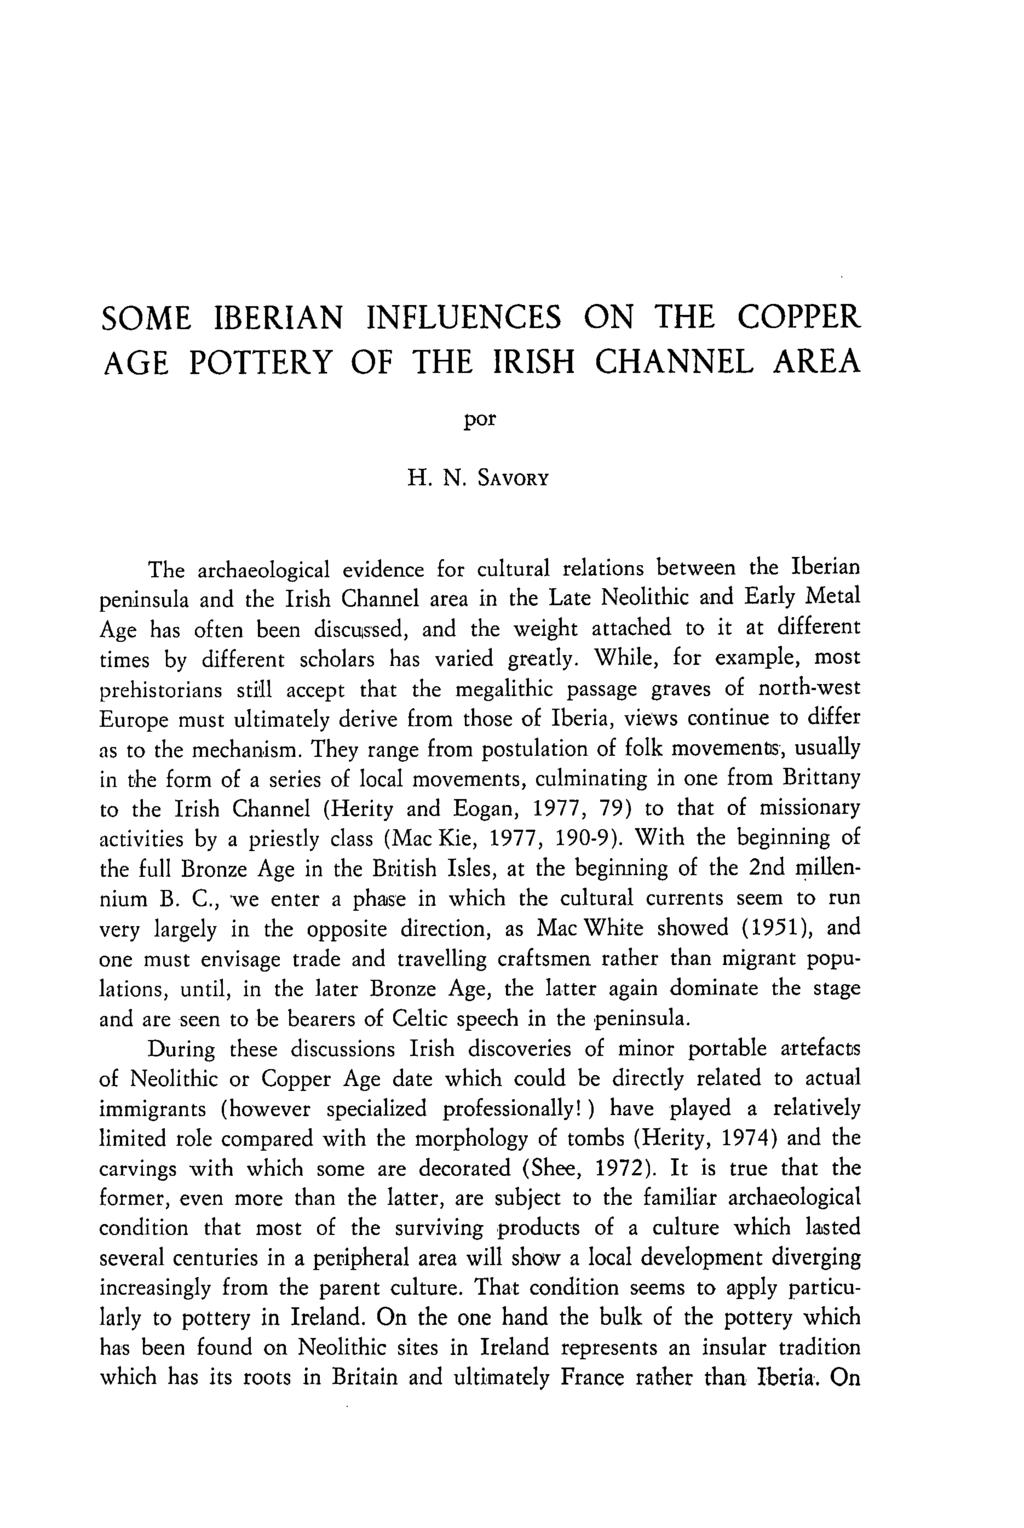 SOME IBERIAN INFLUENCES ON THE COPPER AGE POTTERY OF THE IRISH CHANNEL AREA por H. N.